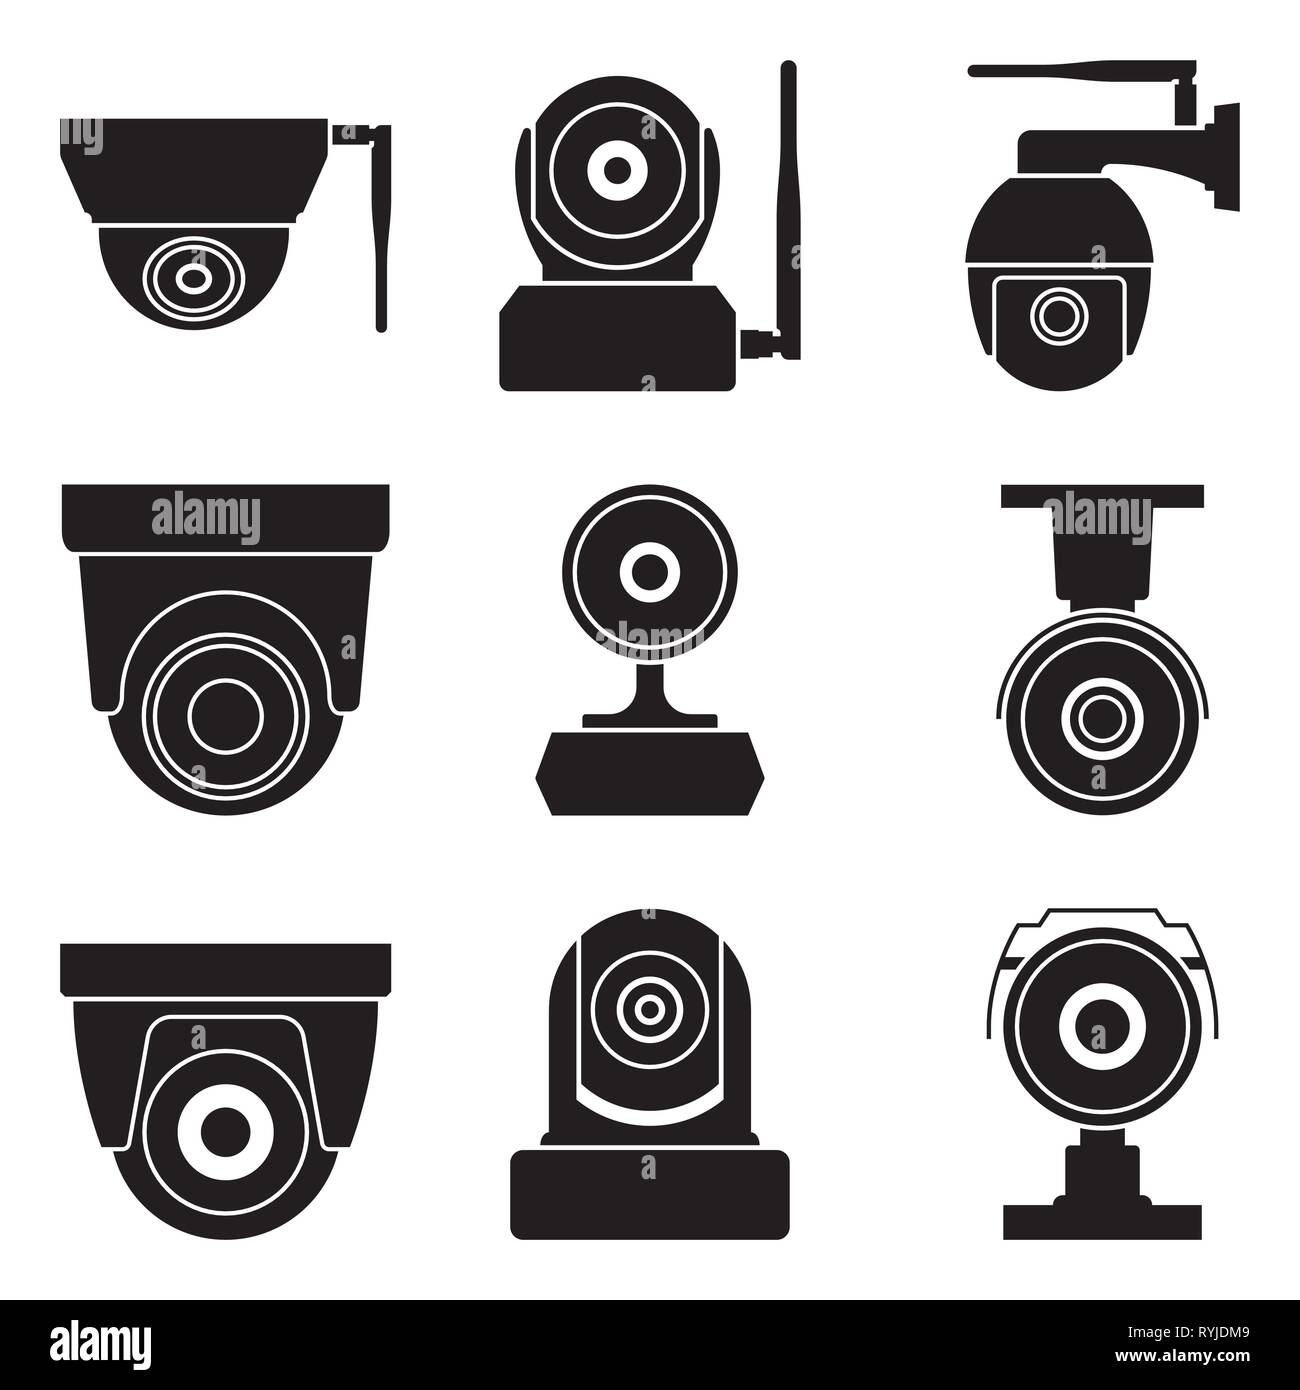 Security camera. Home surveillance equipment. Silhouette vector icons Stock Vector